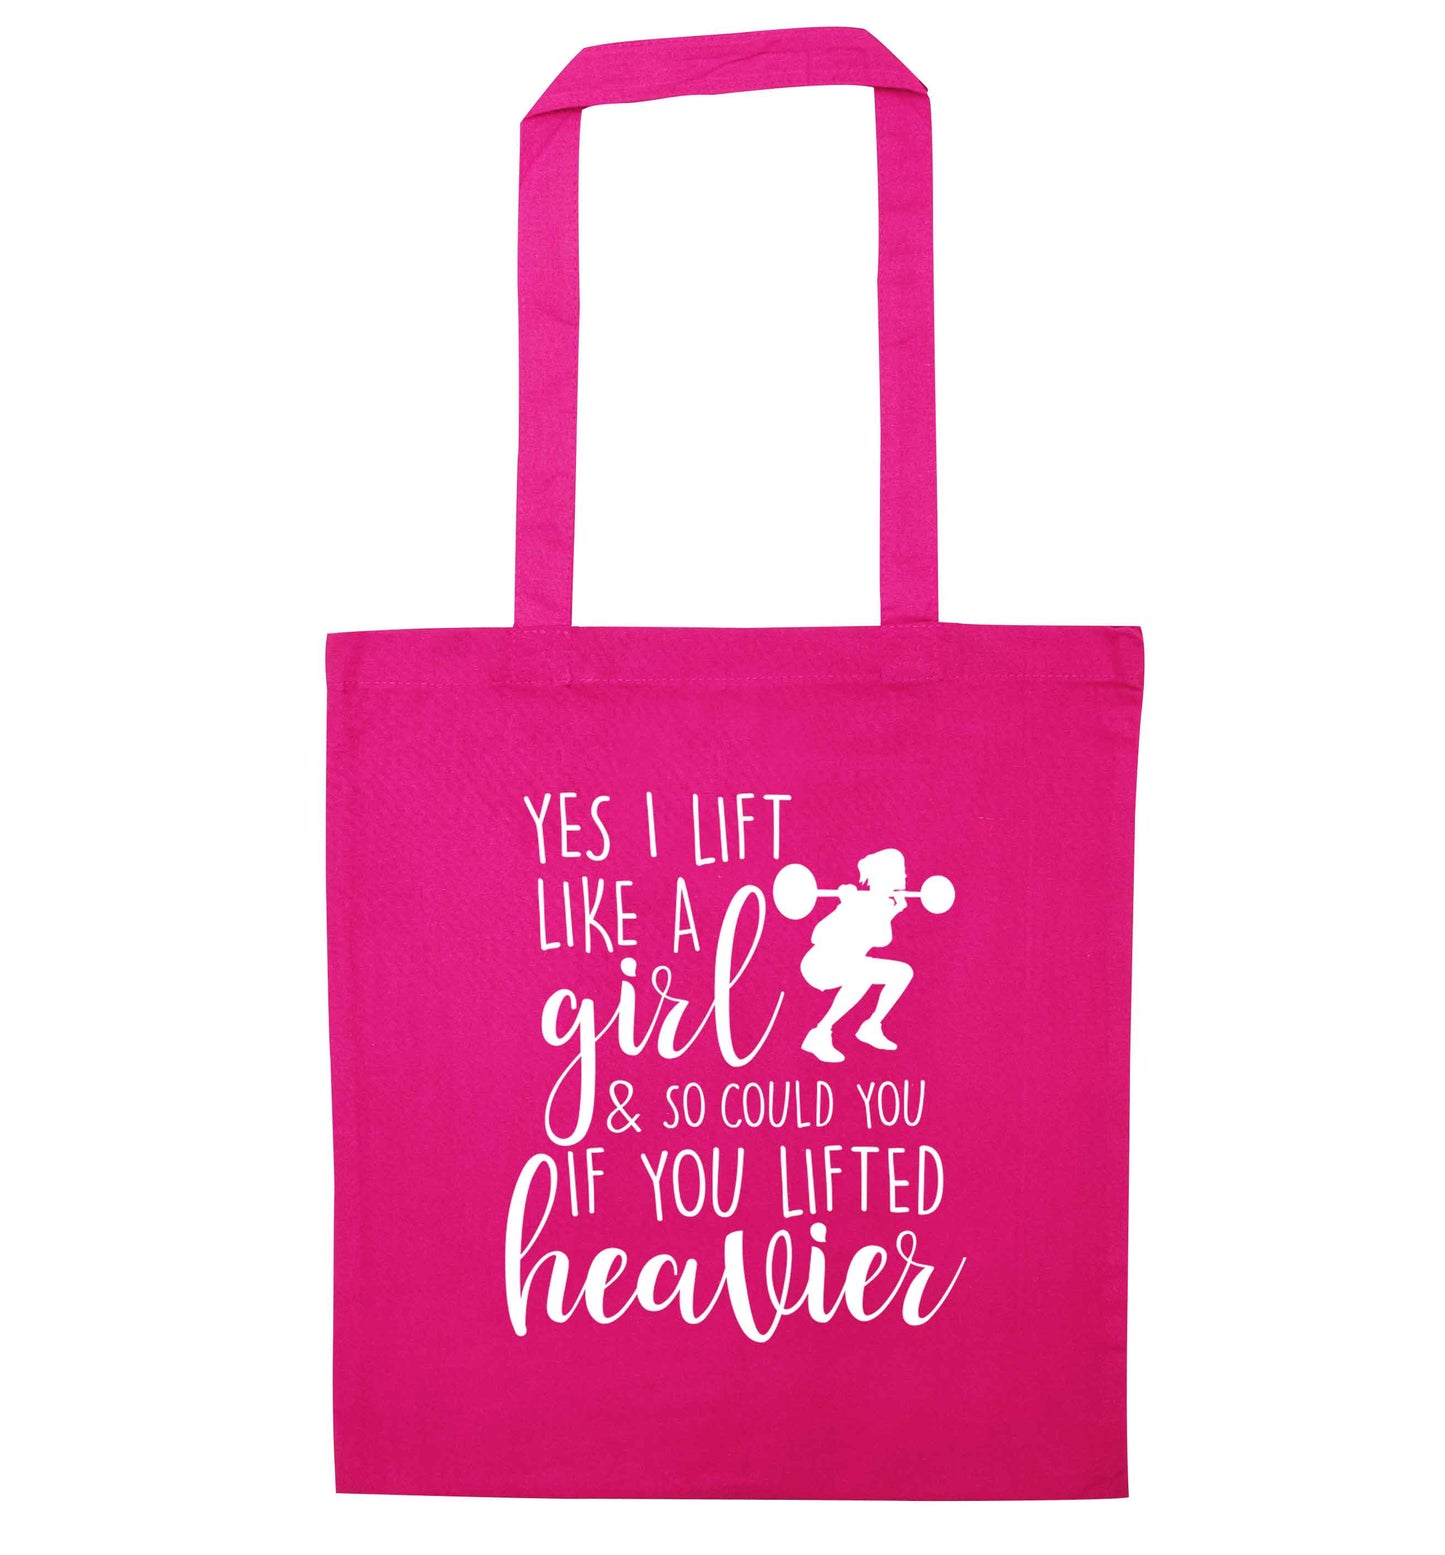 Yes I lift like a girl and so could you if you lifted heavier pink tote bag